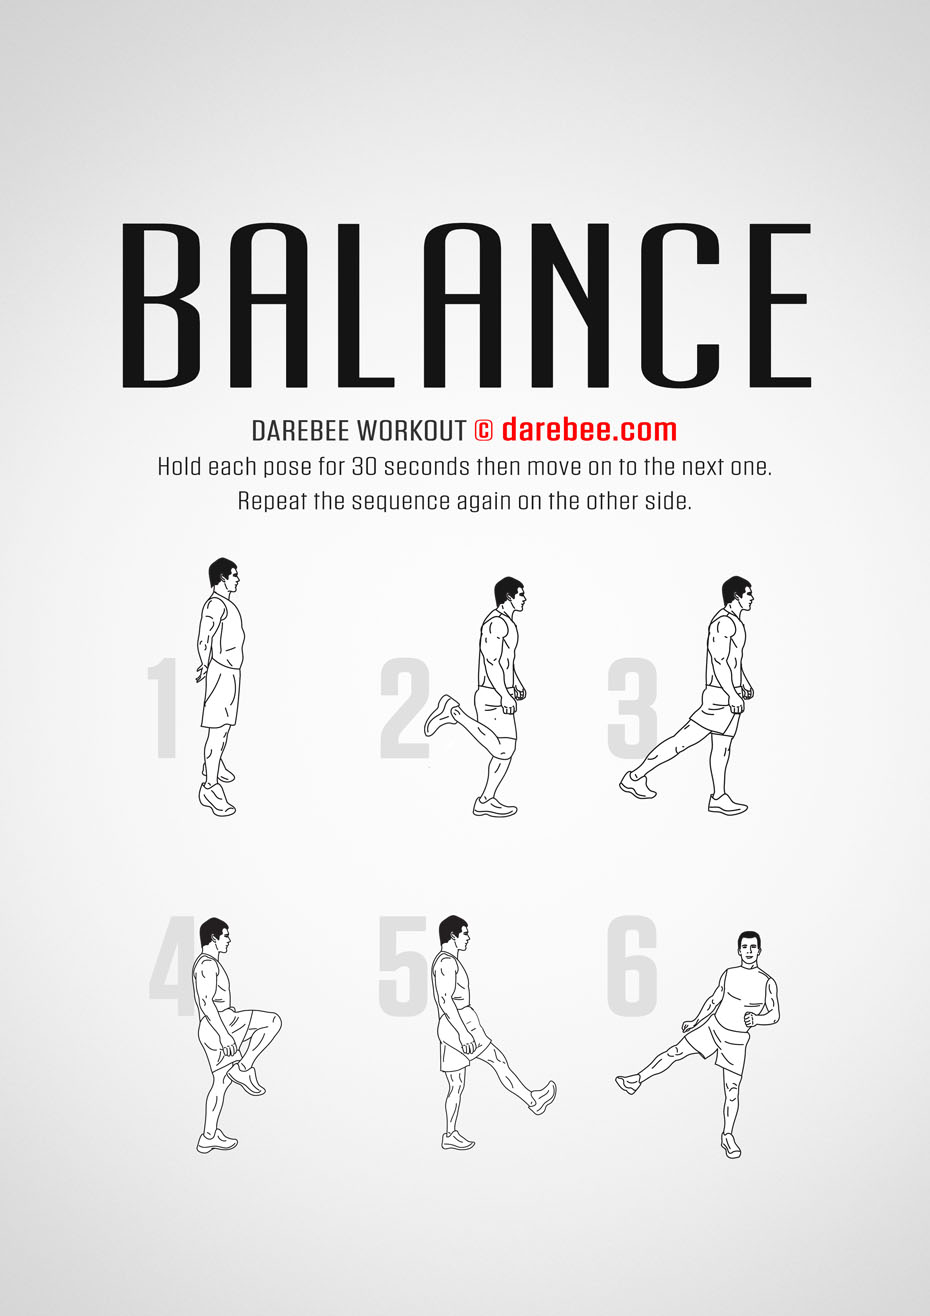 Balance is a Darebee home fitness workout that tests how your brain and body work together. 